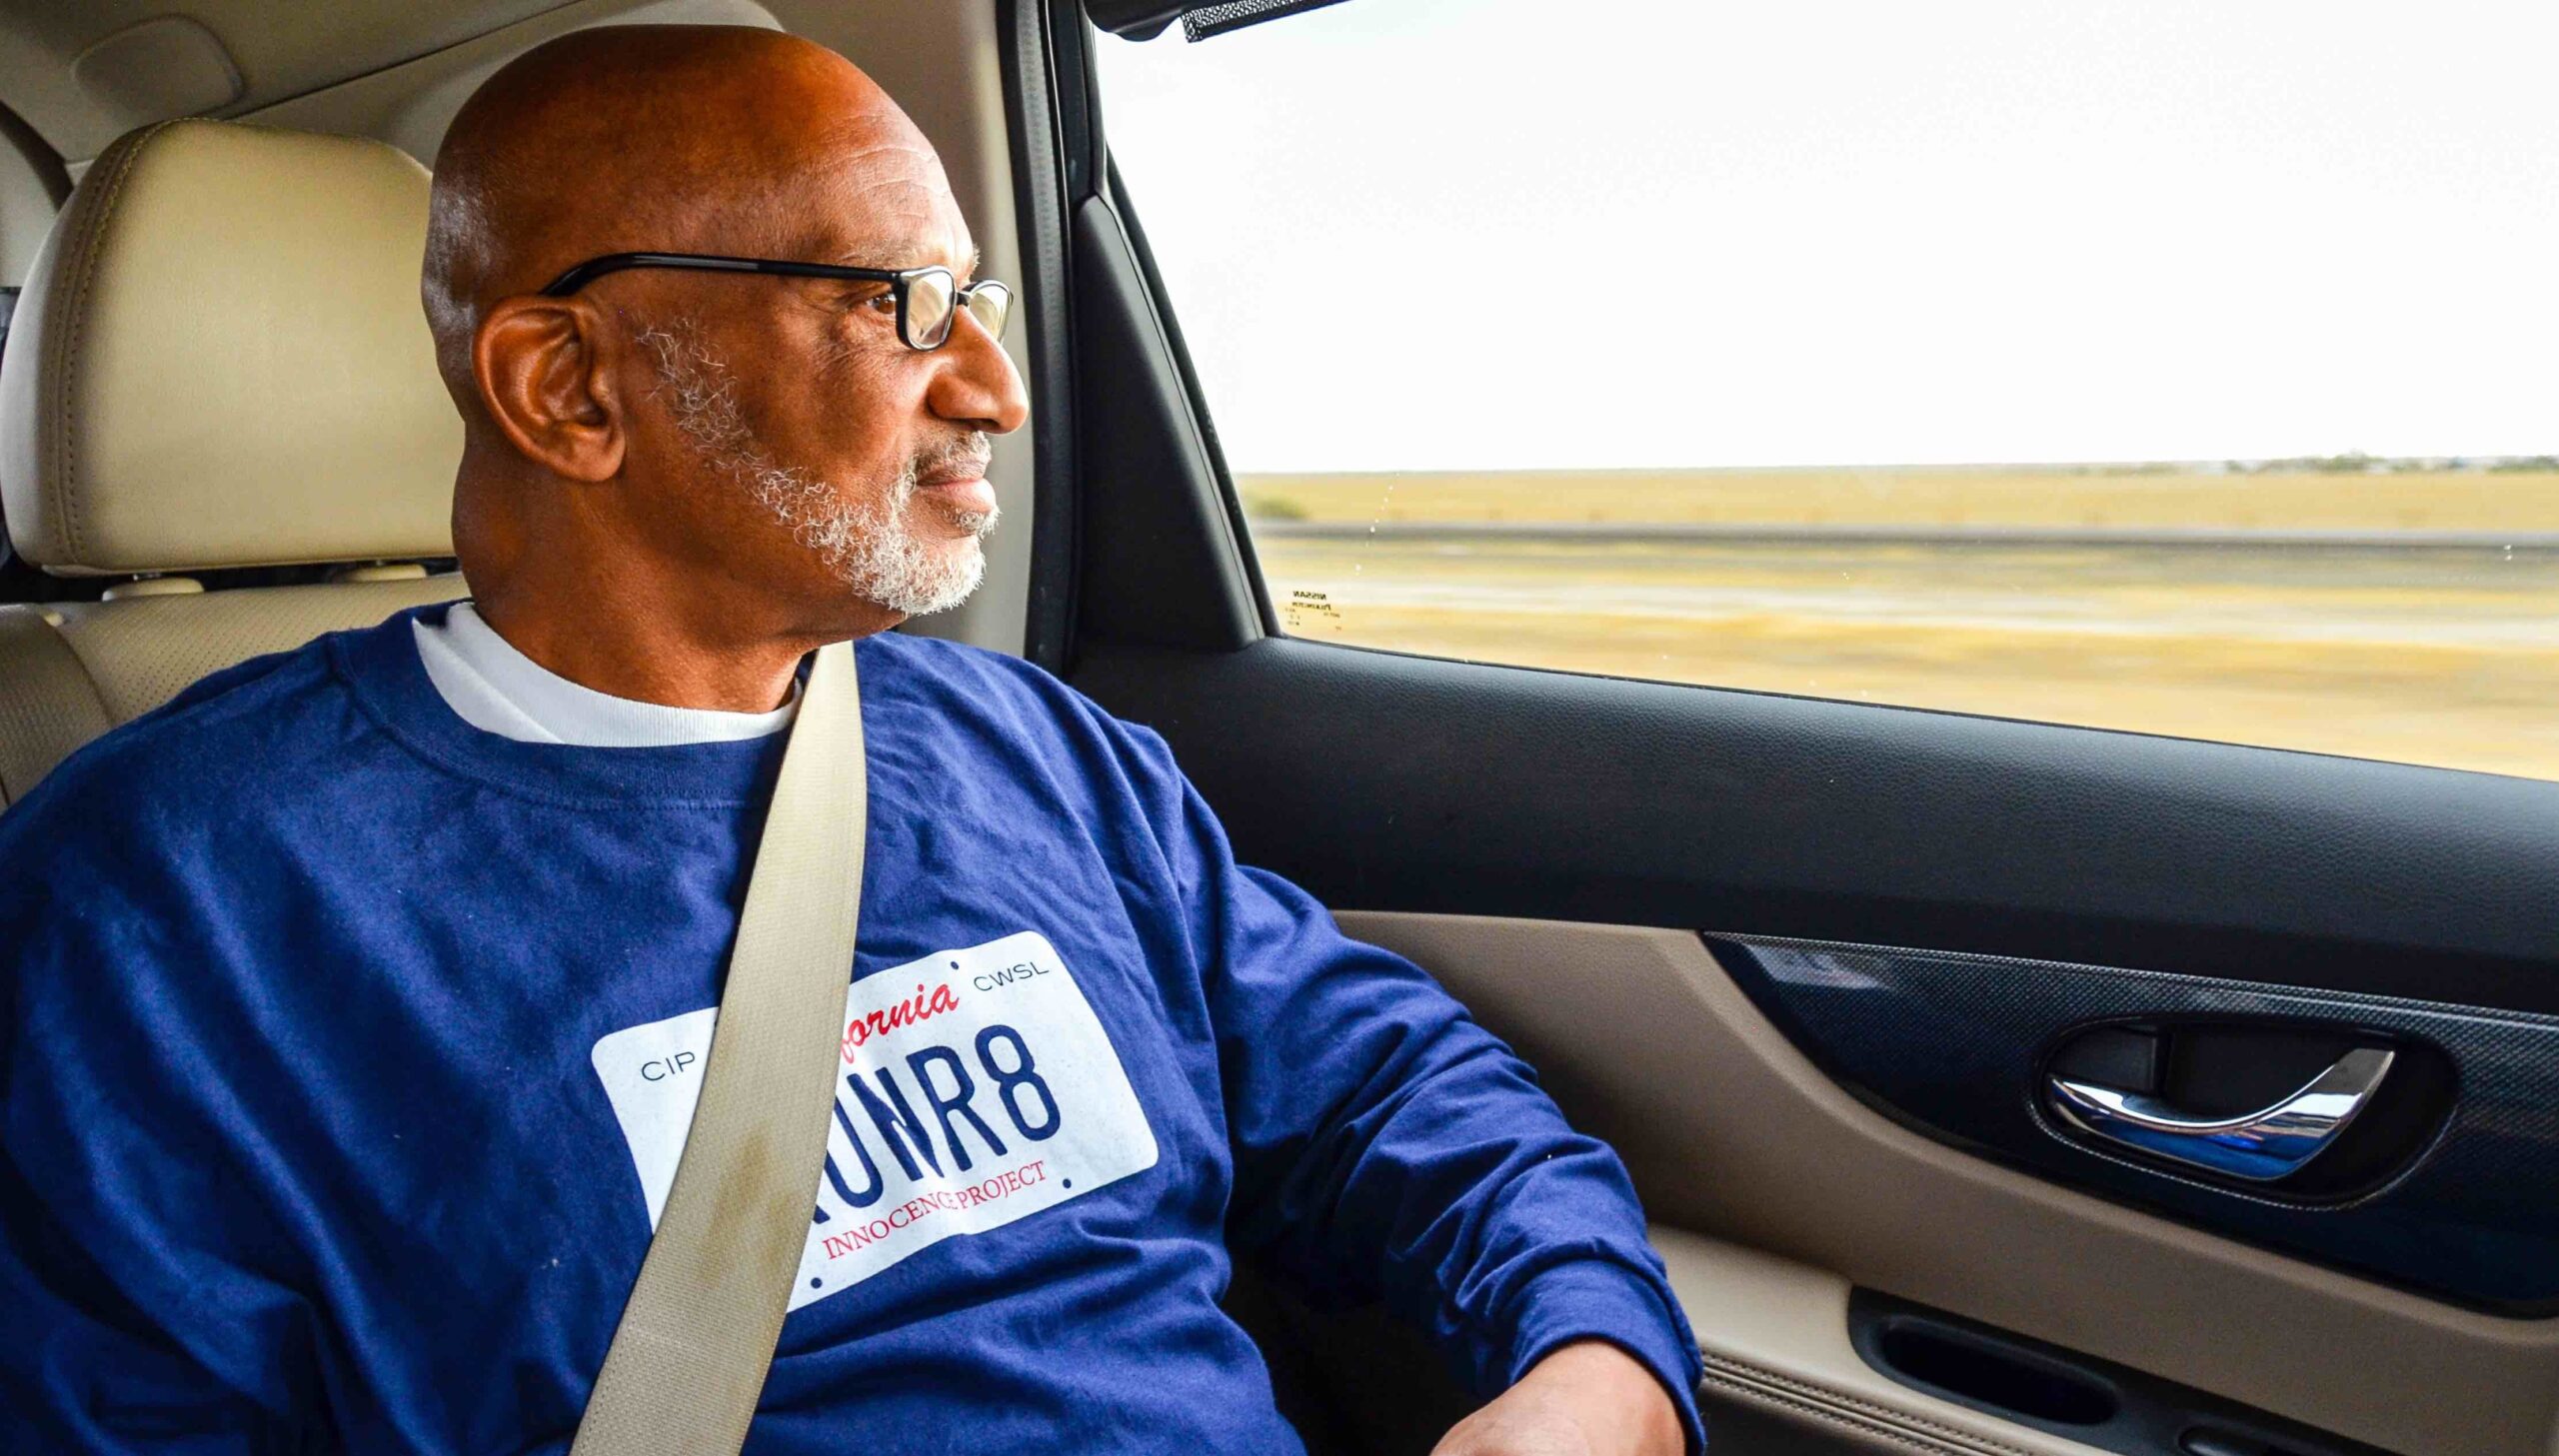 Horace Roberts shortly after he was released from prison wearing a CIP shirt. Photo courtesy of the California Innocence Project.